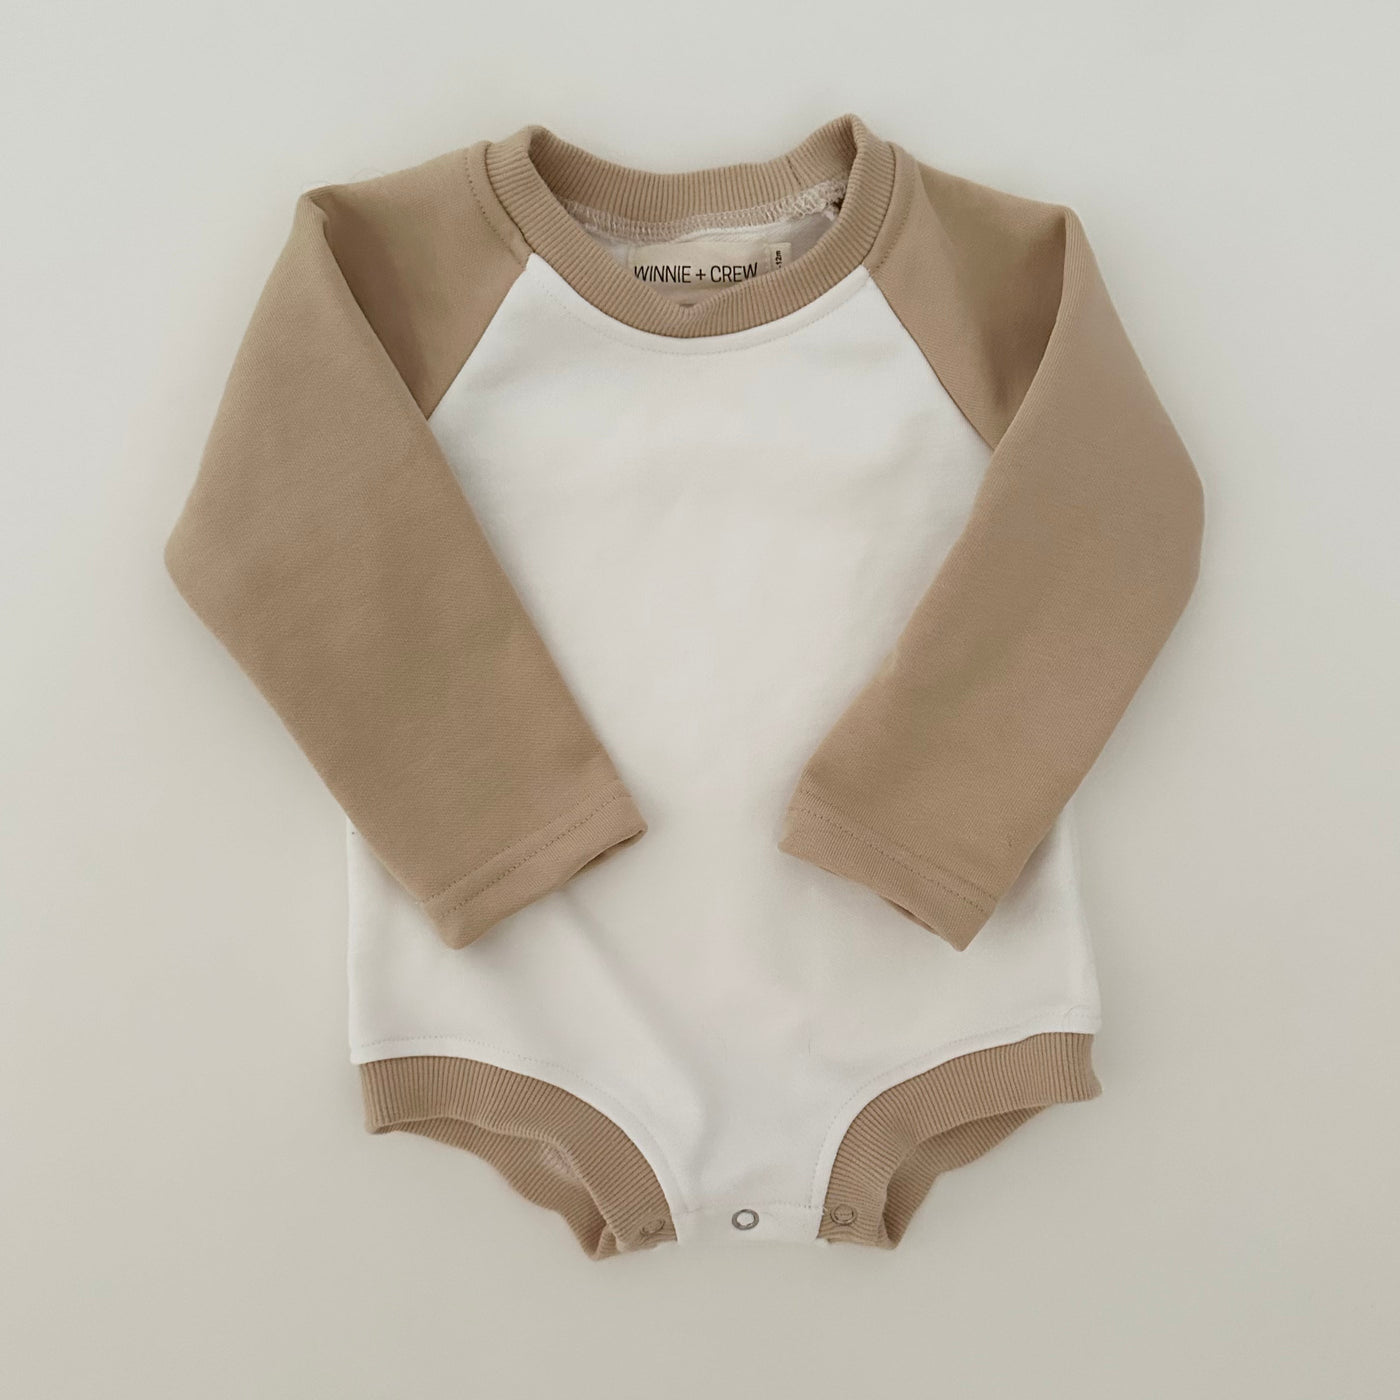 a baby bodysuit on a white background